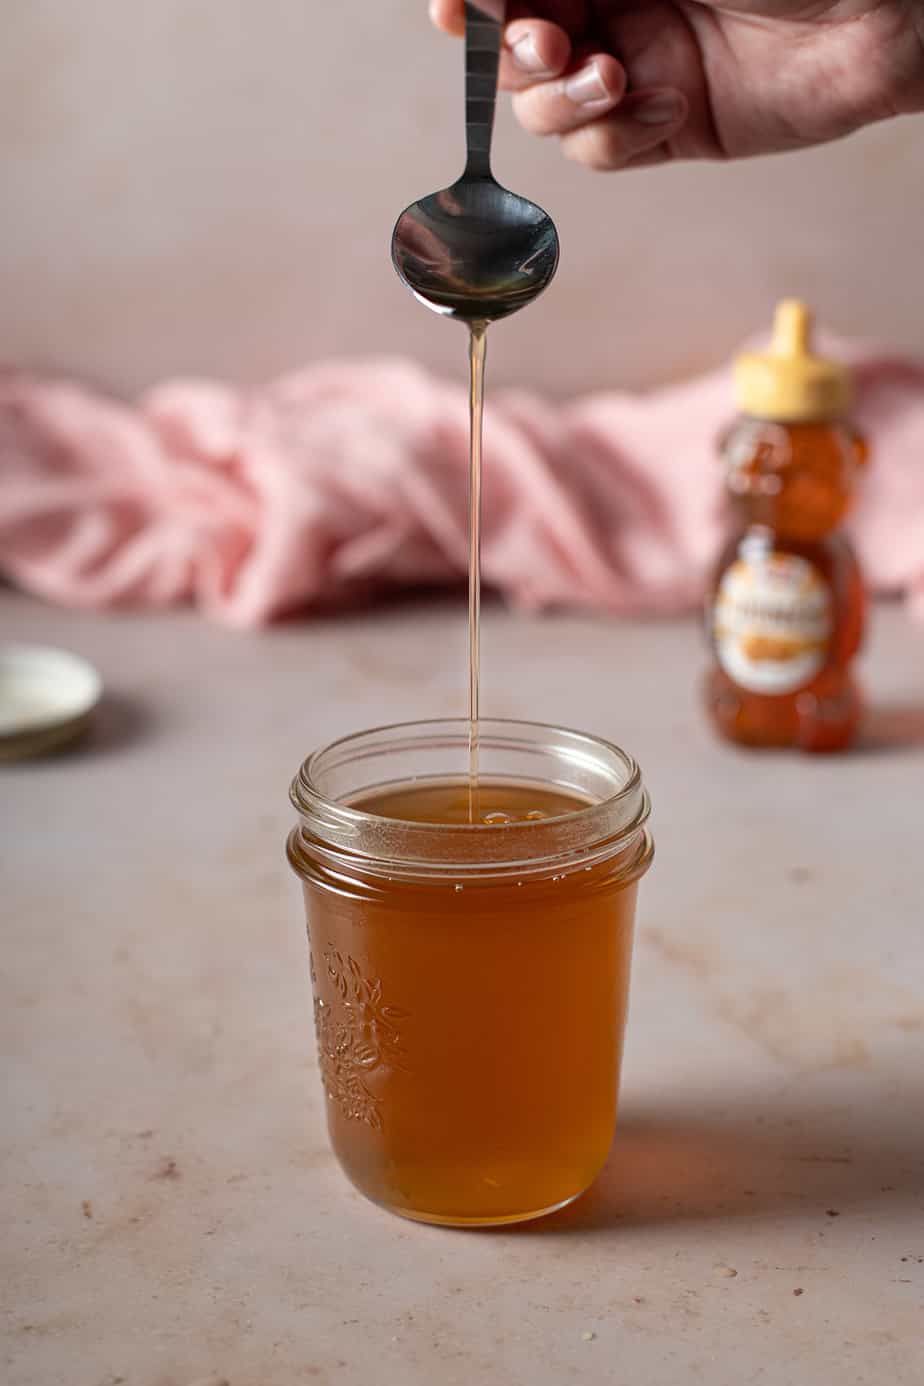 jar full of honey syrup, a spoon is drizzling more syrup into the jar